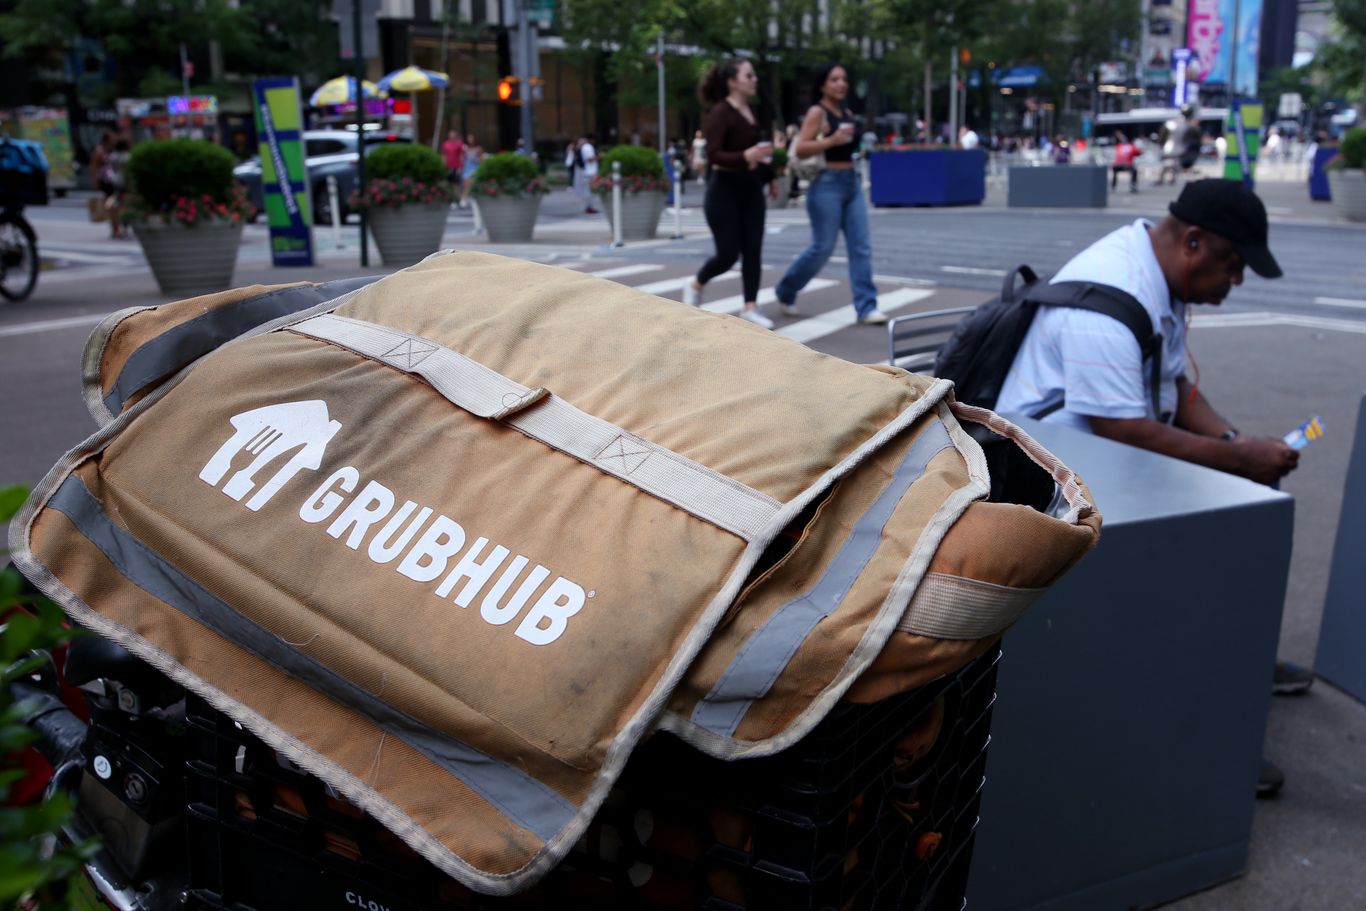 NYC DoorDash, Uber Eats drivers could earn $24 an hour - FreightWaves